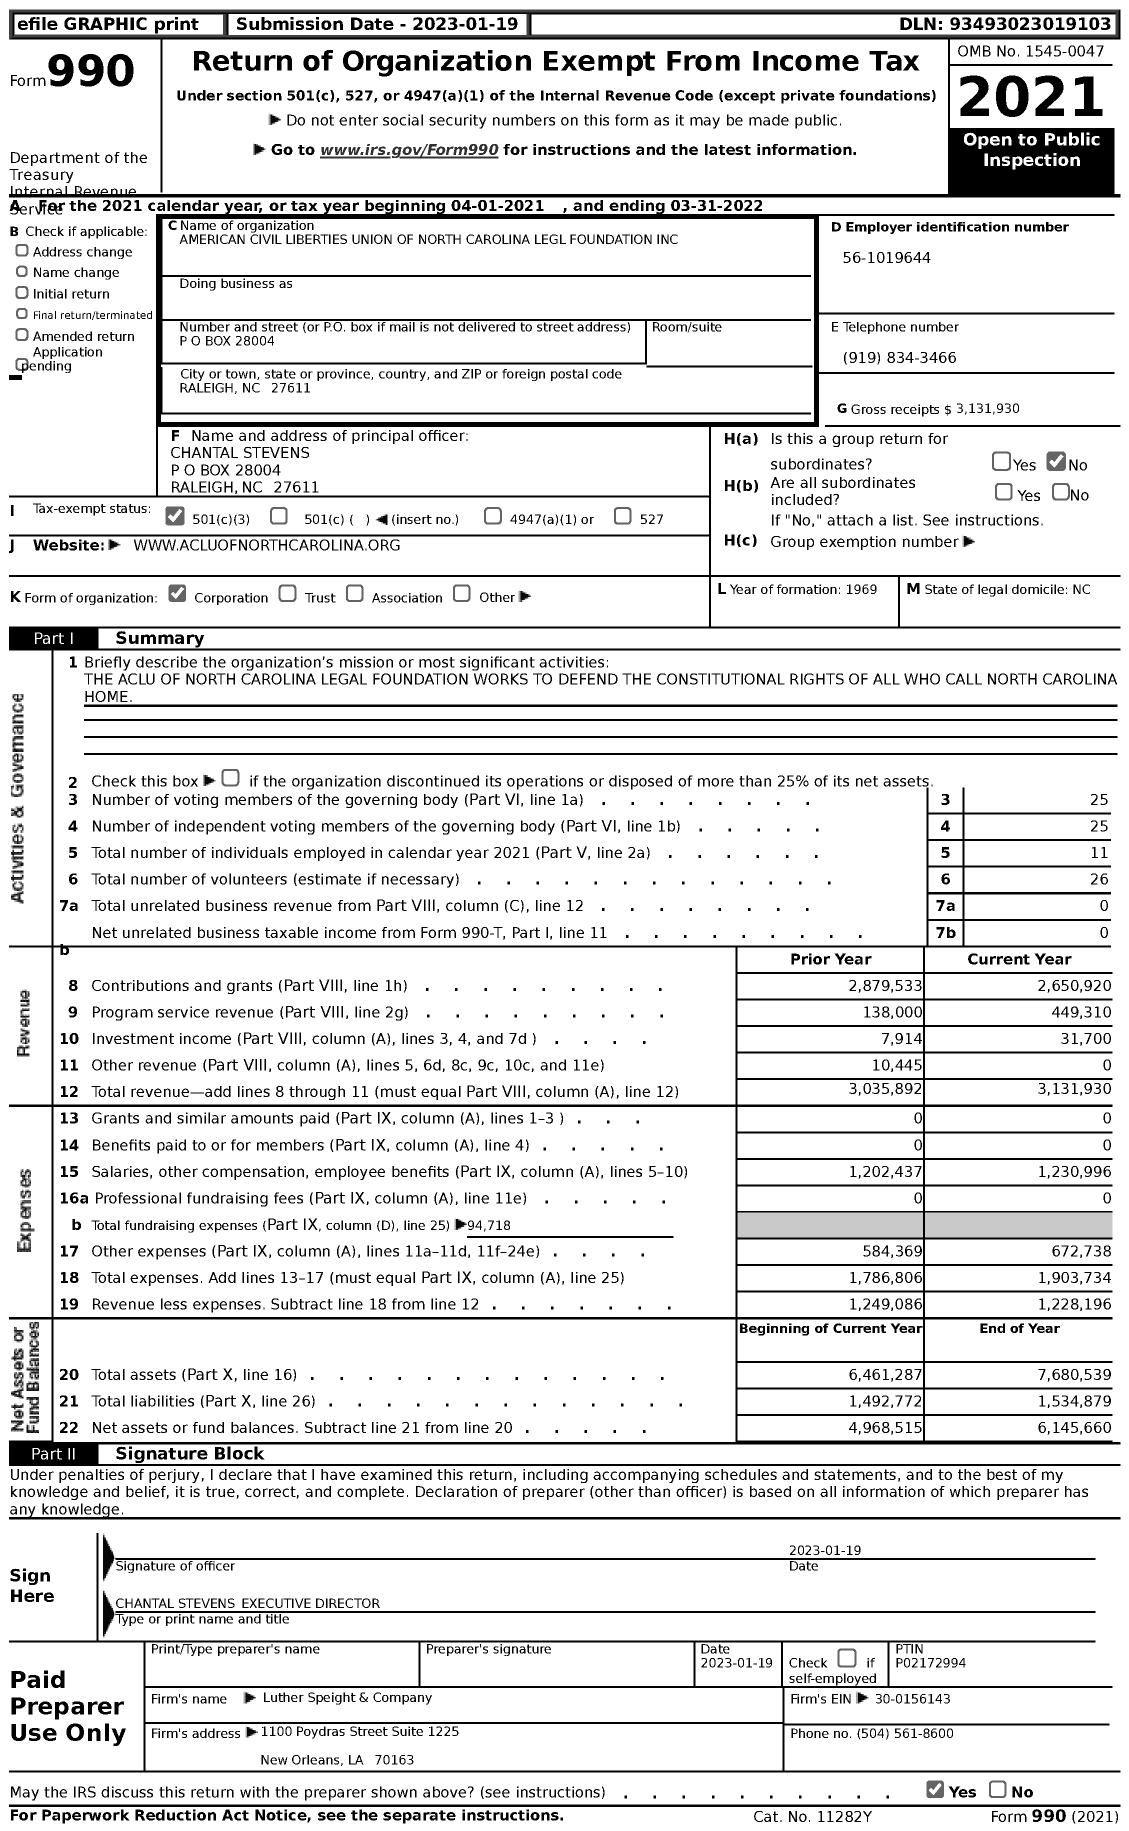 Image of first page of 2021 Form 990 for American Civil Liberties Union of North Carolina Legal Foundation